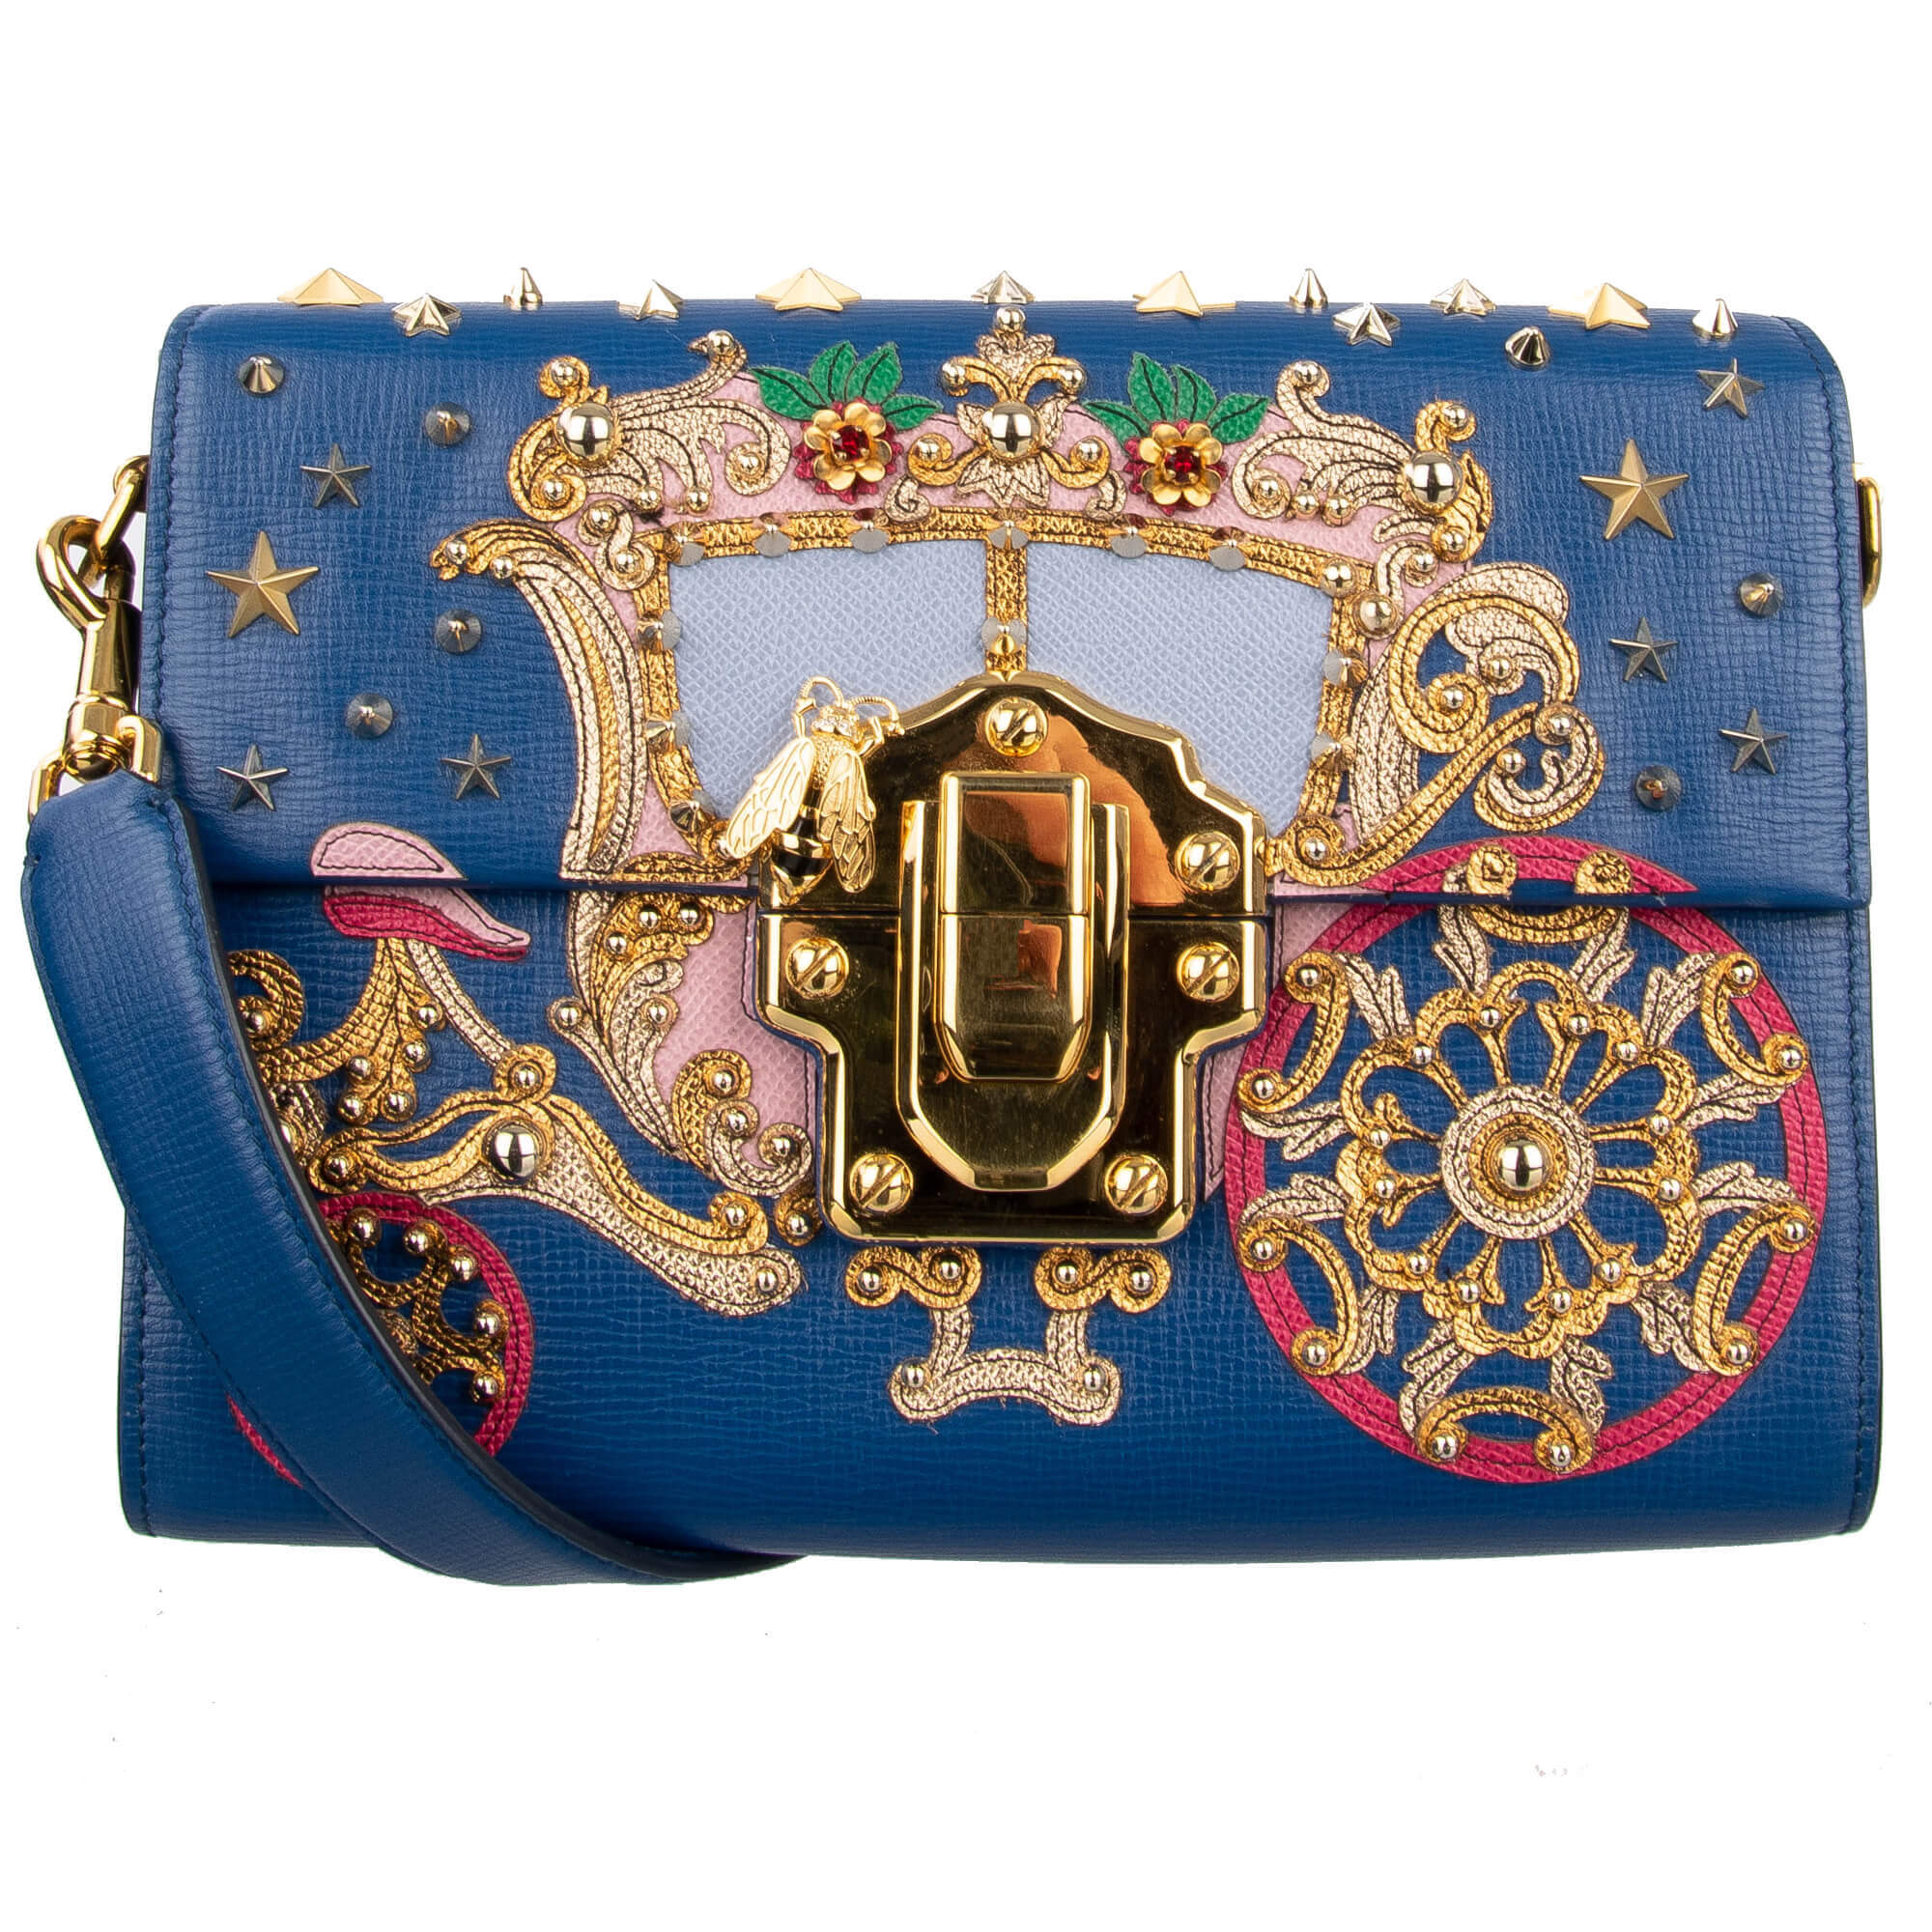 Dolce & Gabbana Studded LUCIA Bag with Coach Blue | FASHION ROOMS